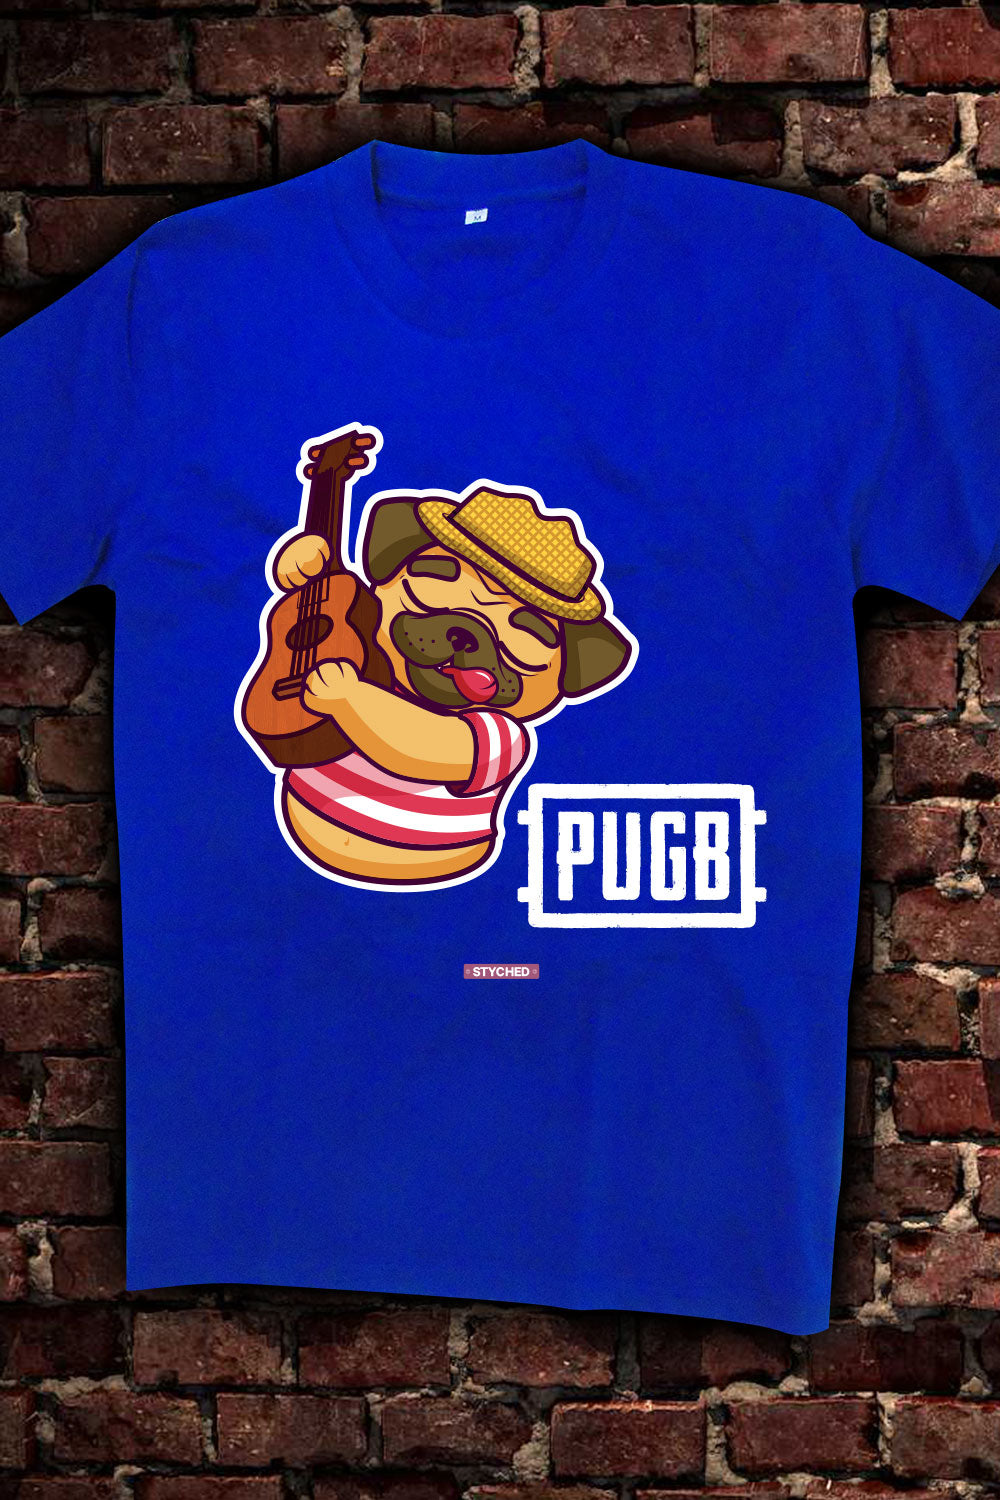 Pugb following PubG style - Quirky Graphic T-Shirt Blue Color